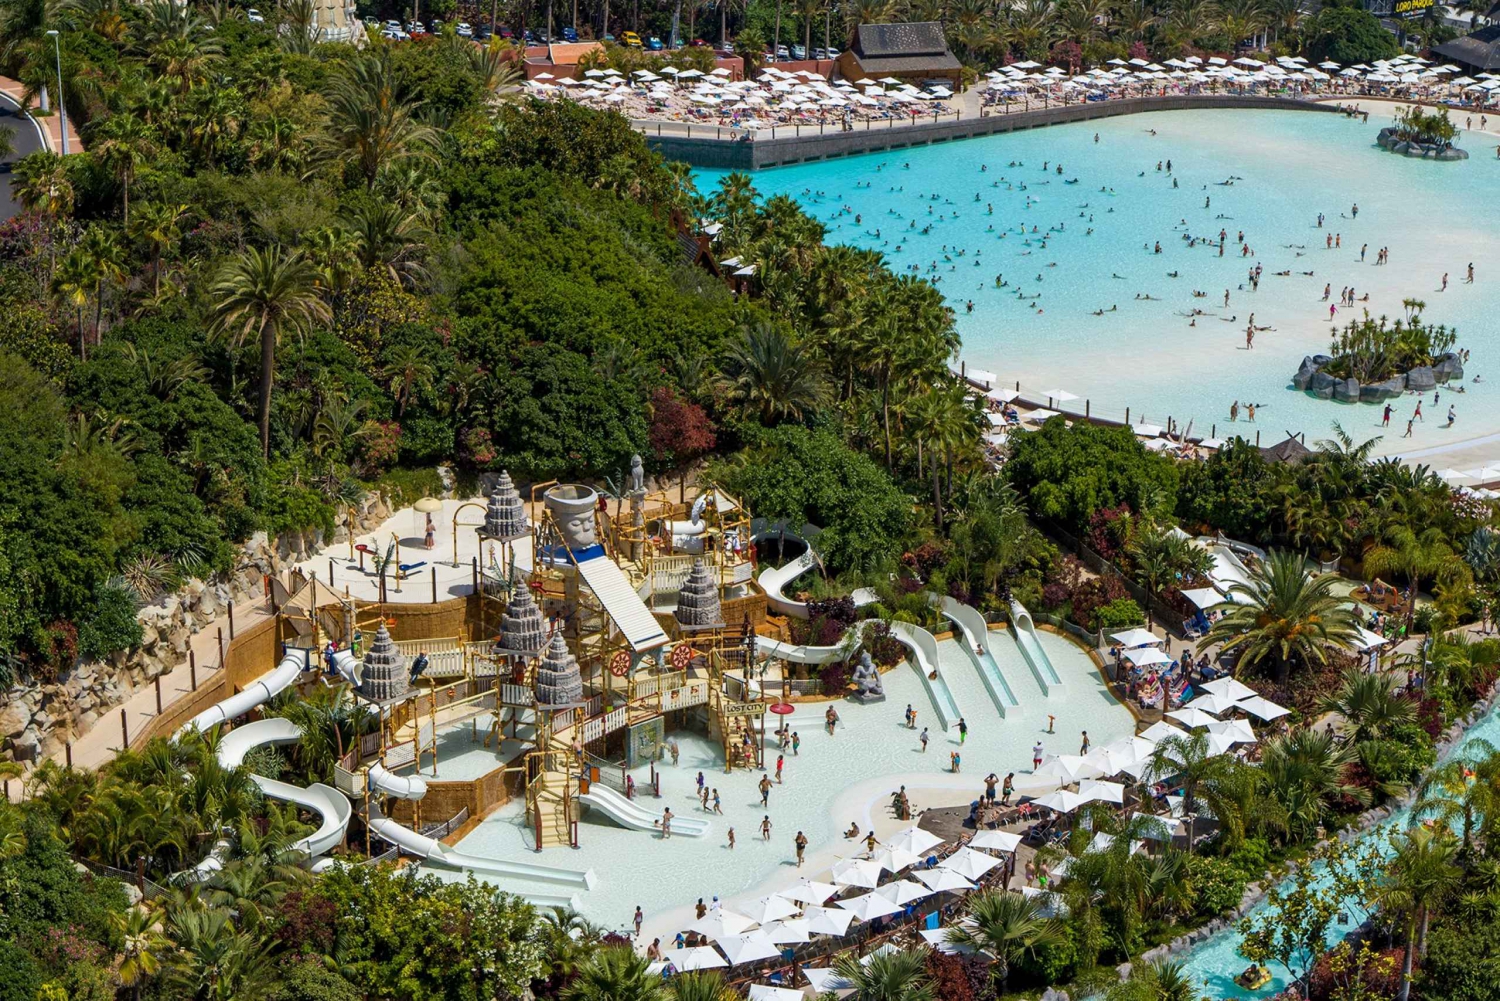 Tenerife: Siam Park Full-Day VIP Entry Ticket